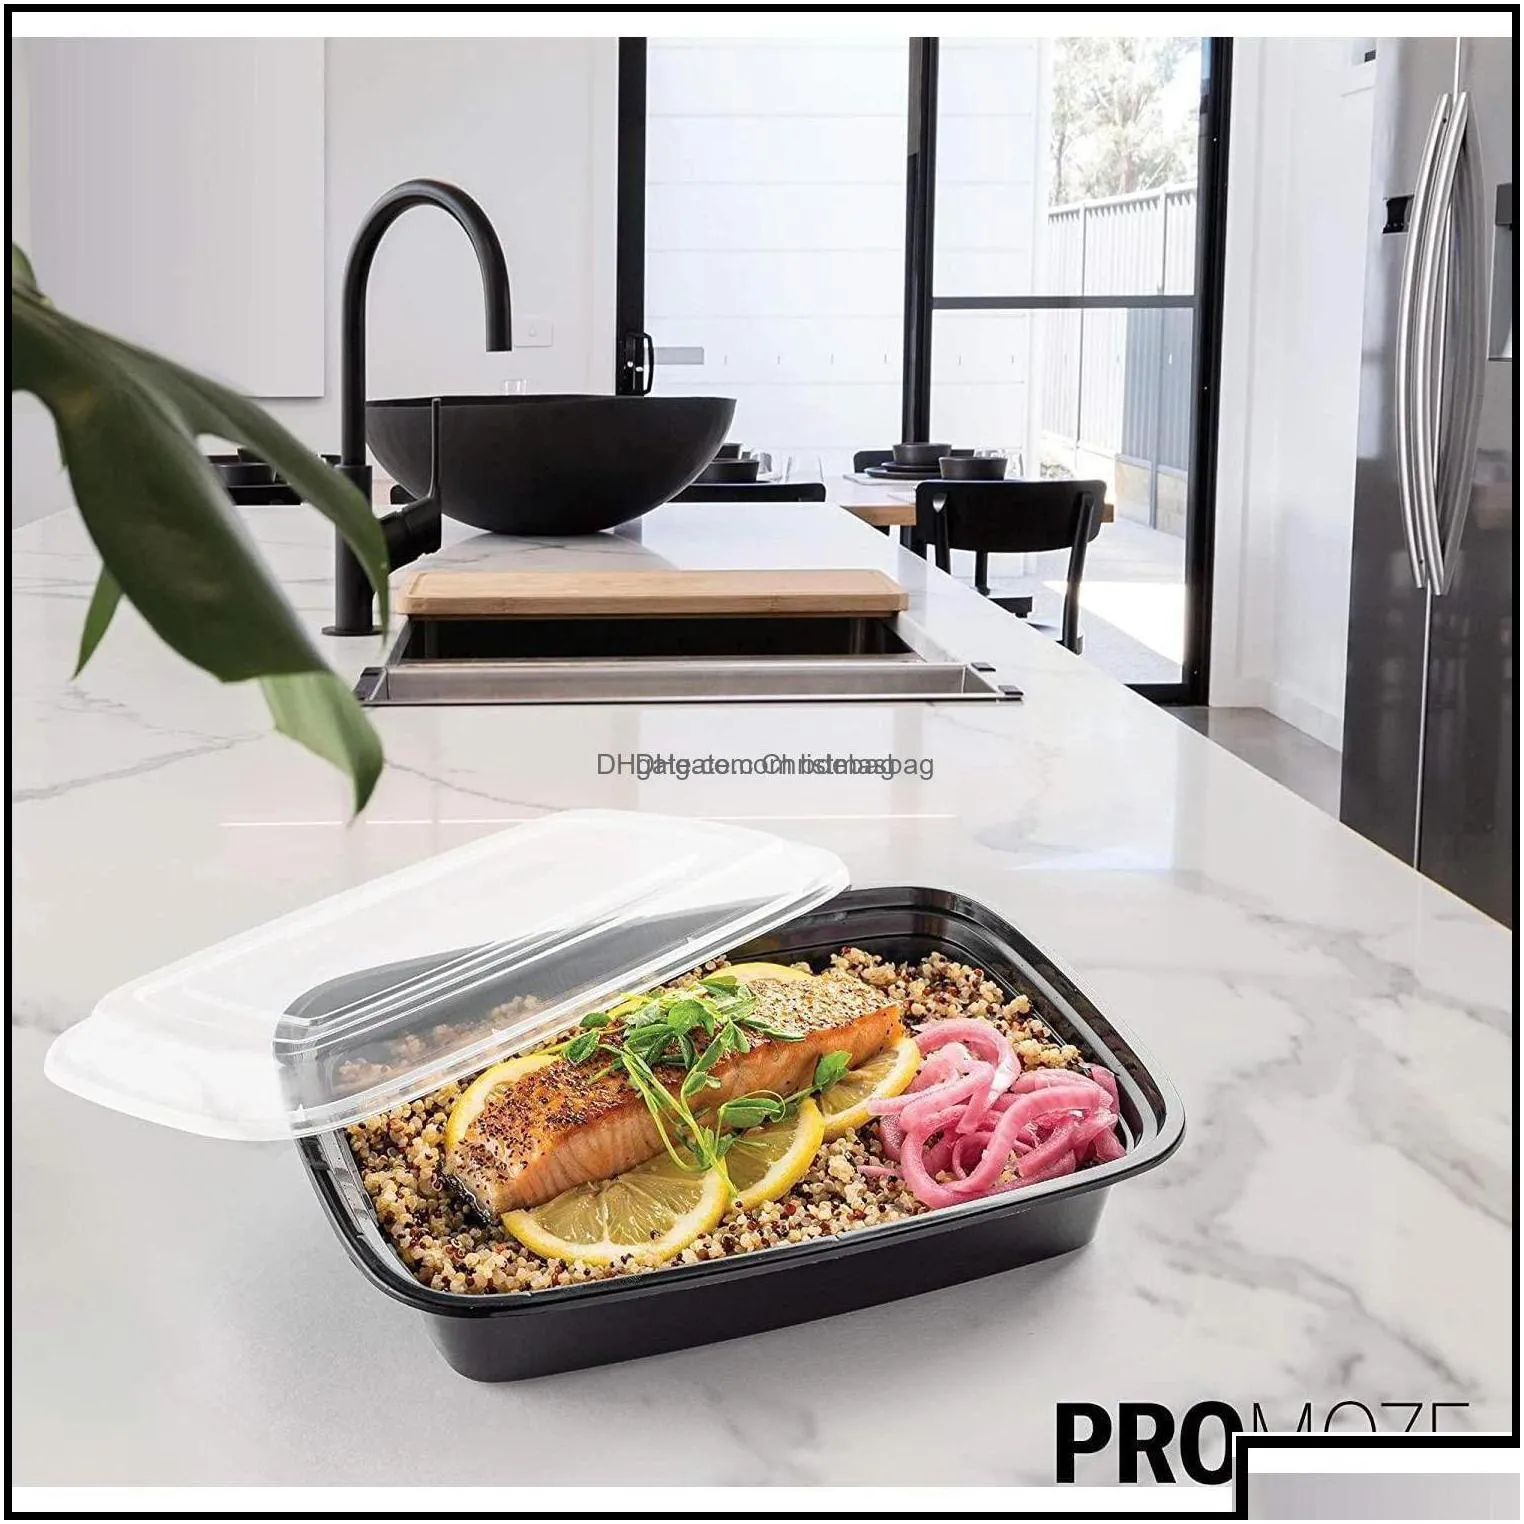 disposable dinnerware kitchen supplies kitchen dining bar home garden lunch box with liddisposable meal prep 750ml plastic takeaway